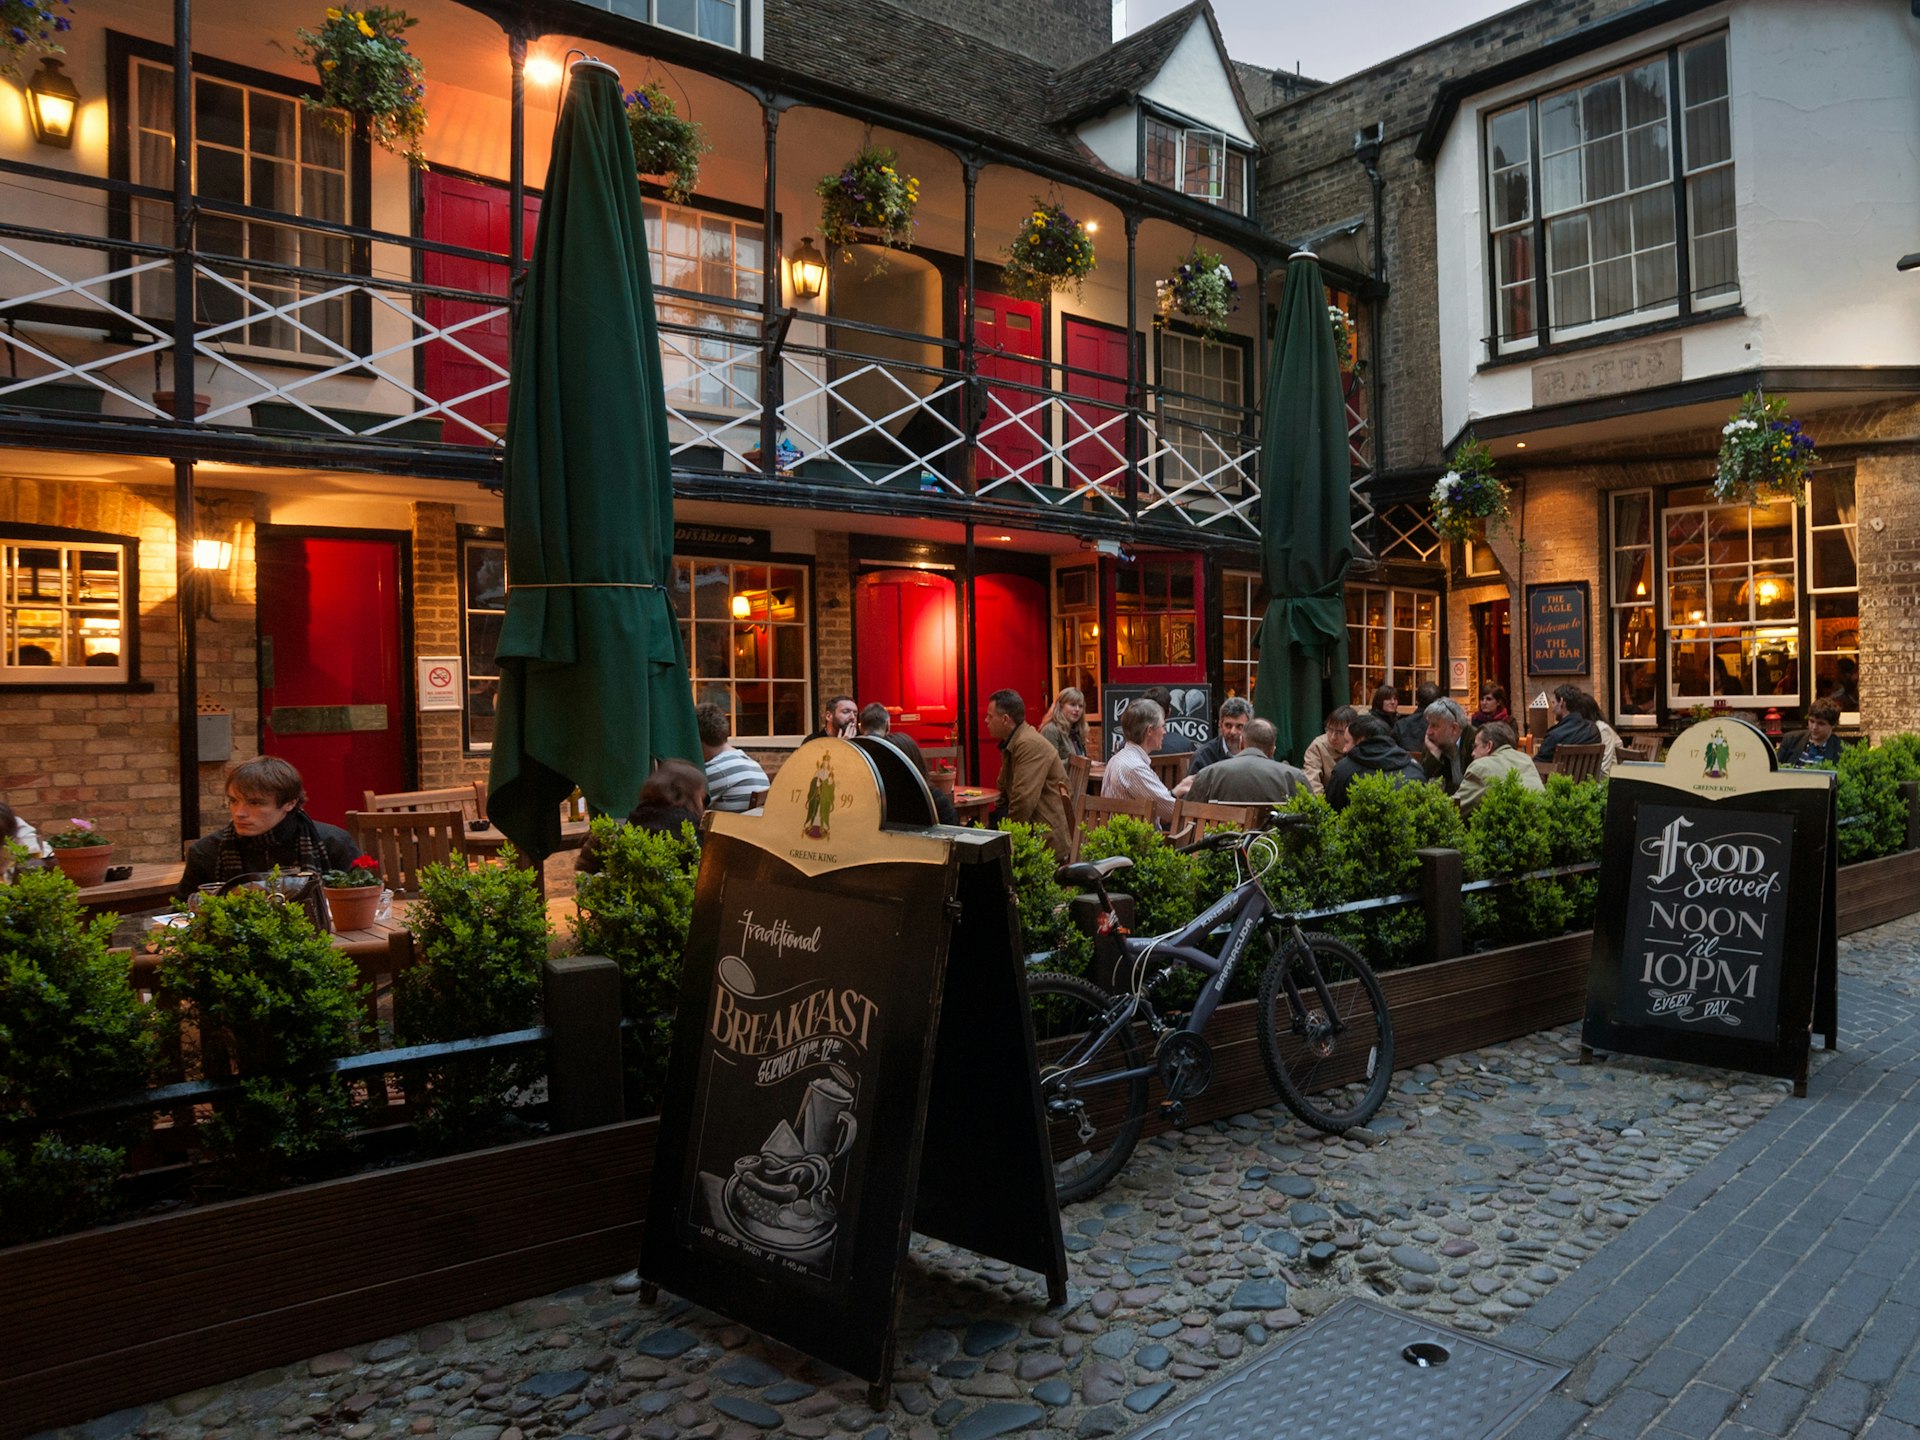 the exterior of the Eagle pub at dusk